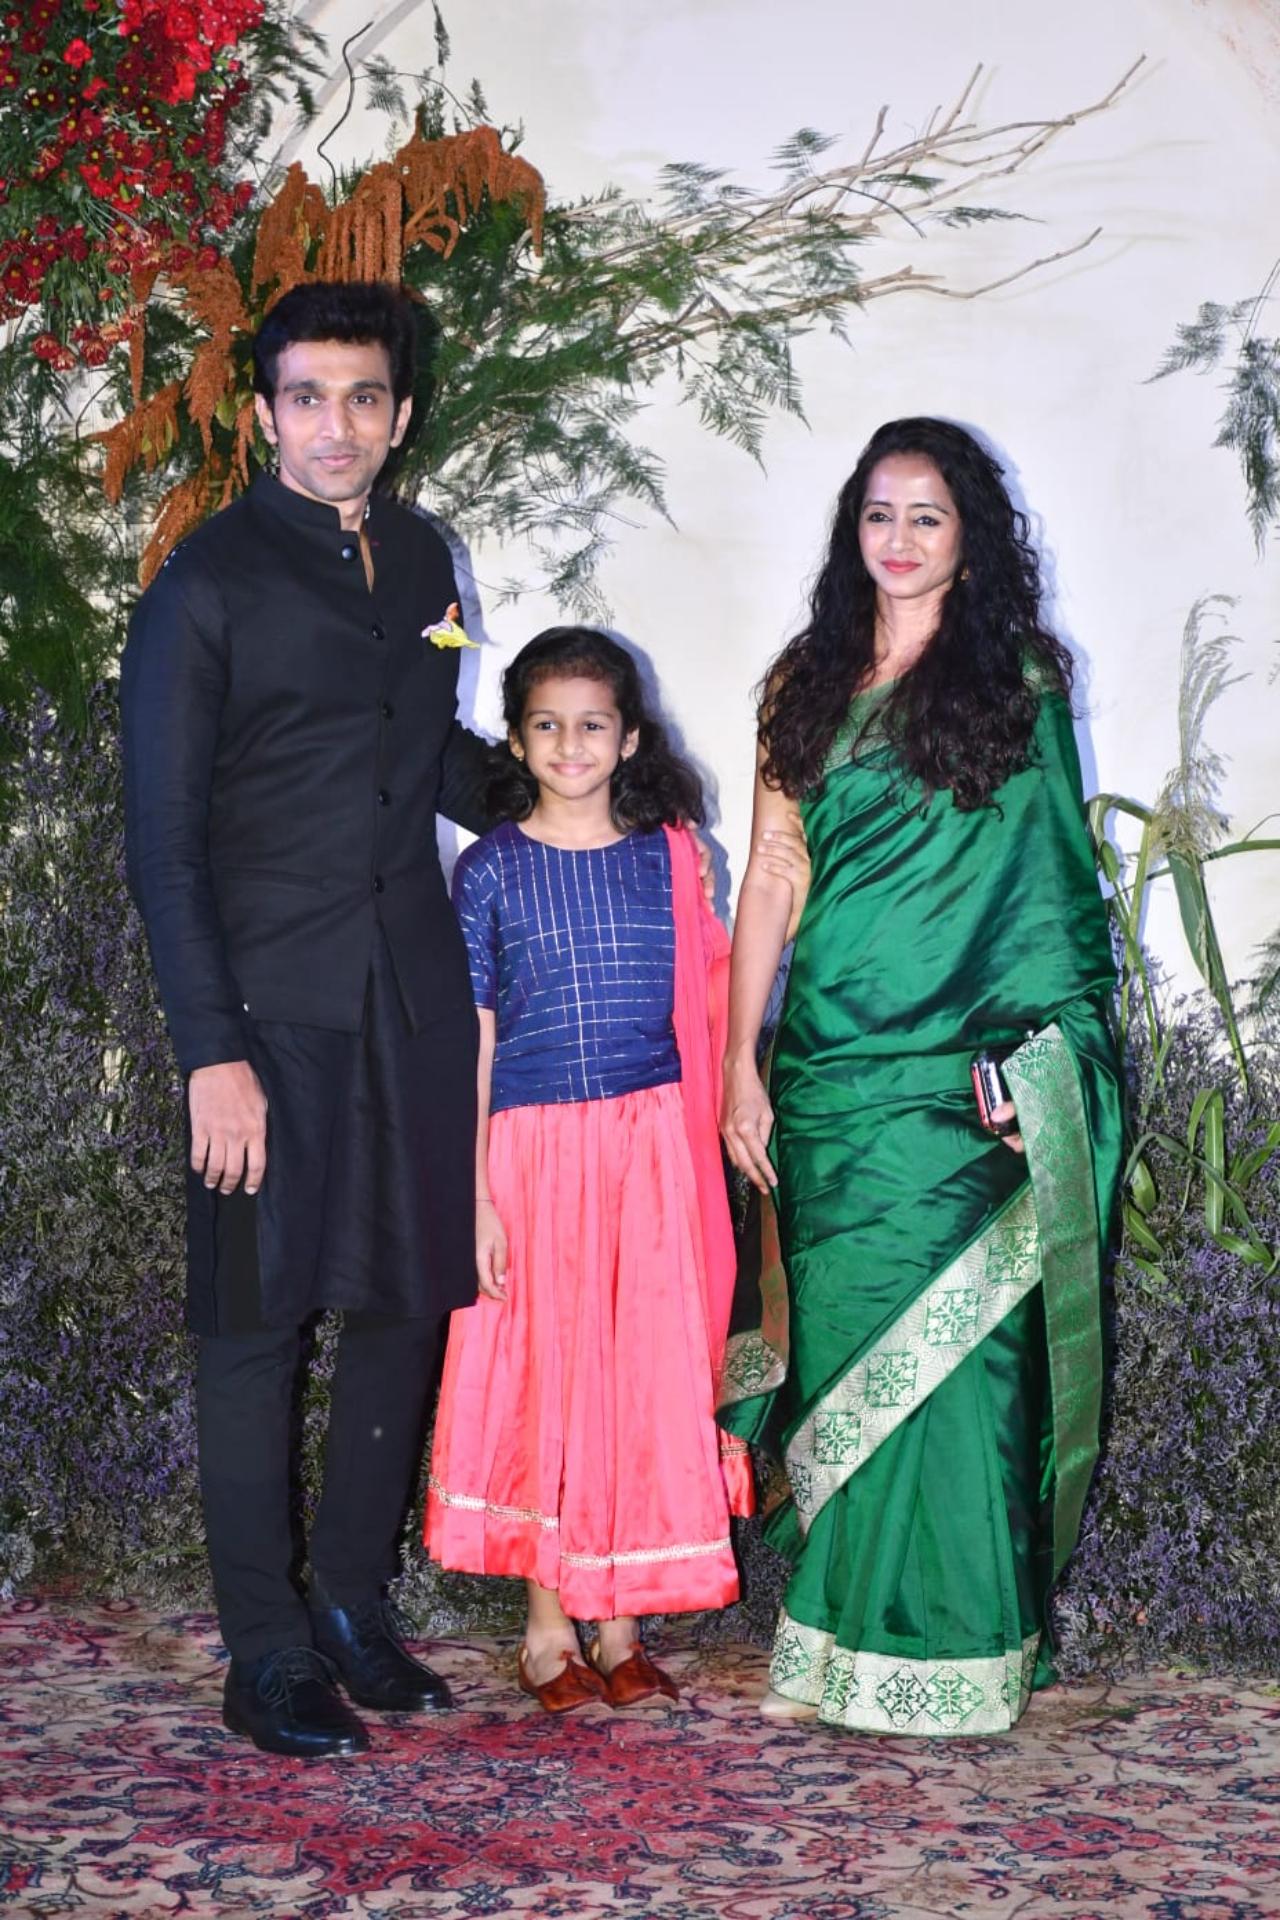 Pratik Gandhi made a rare appearance with his wife and daughter for the wedding reception